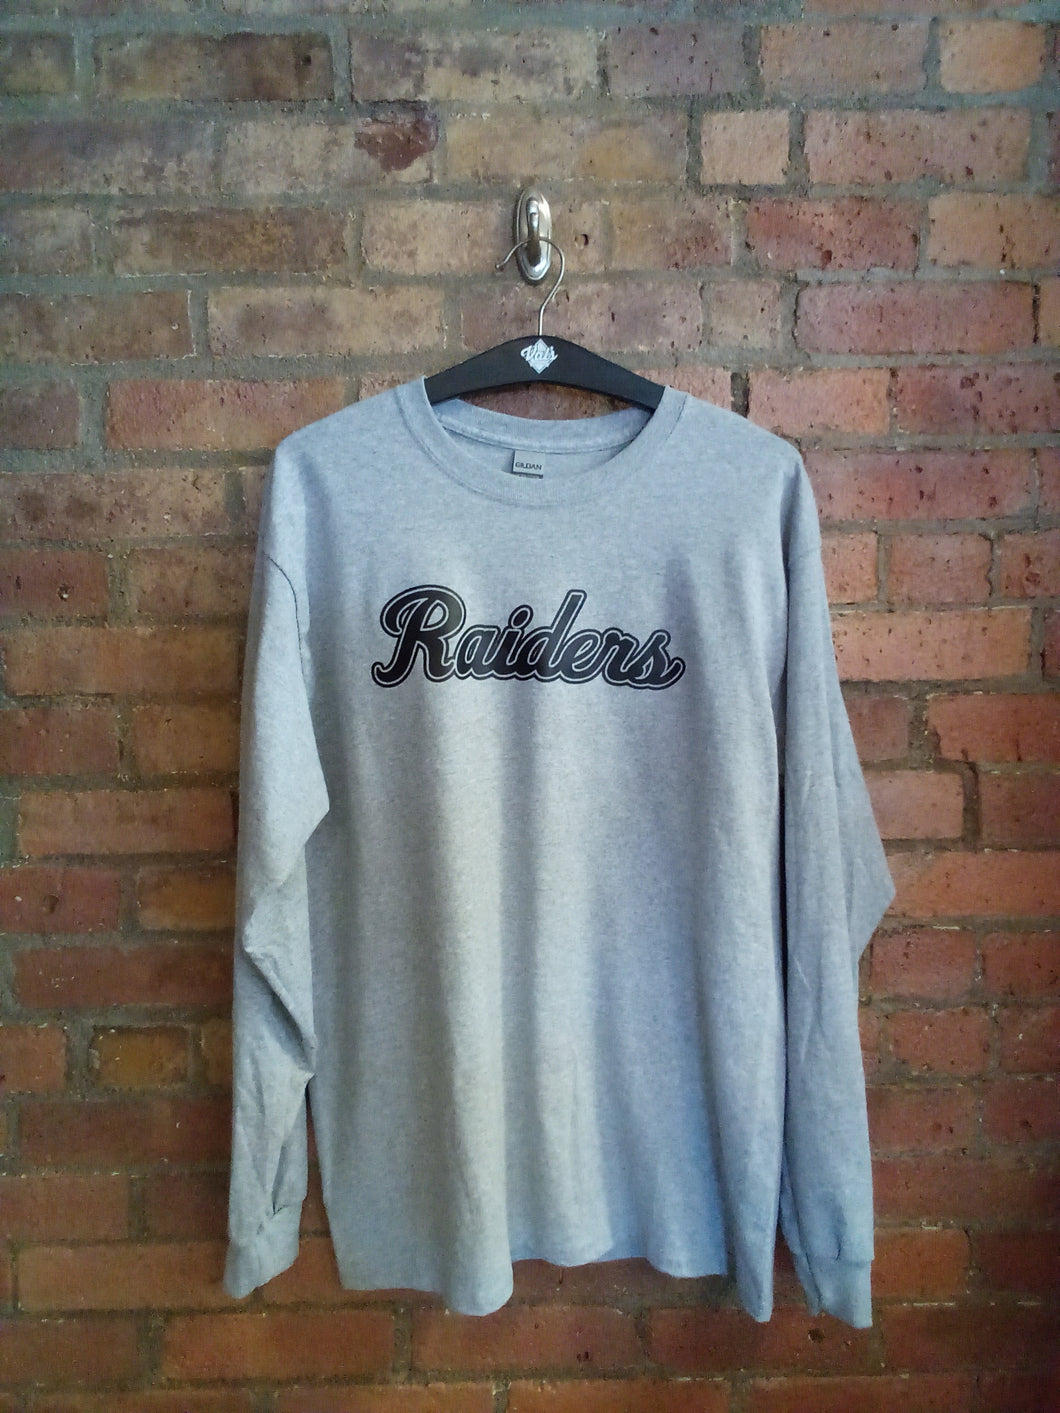 CLEARANCE - Mechanicville Raiders Gray Long Sleeved Shirt  - Size Large